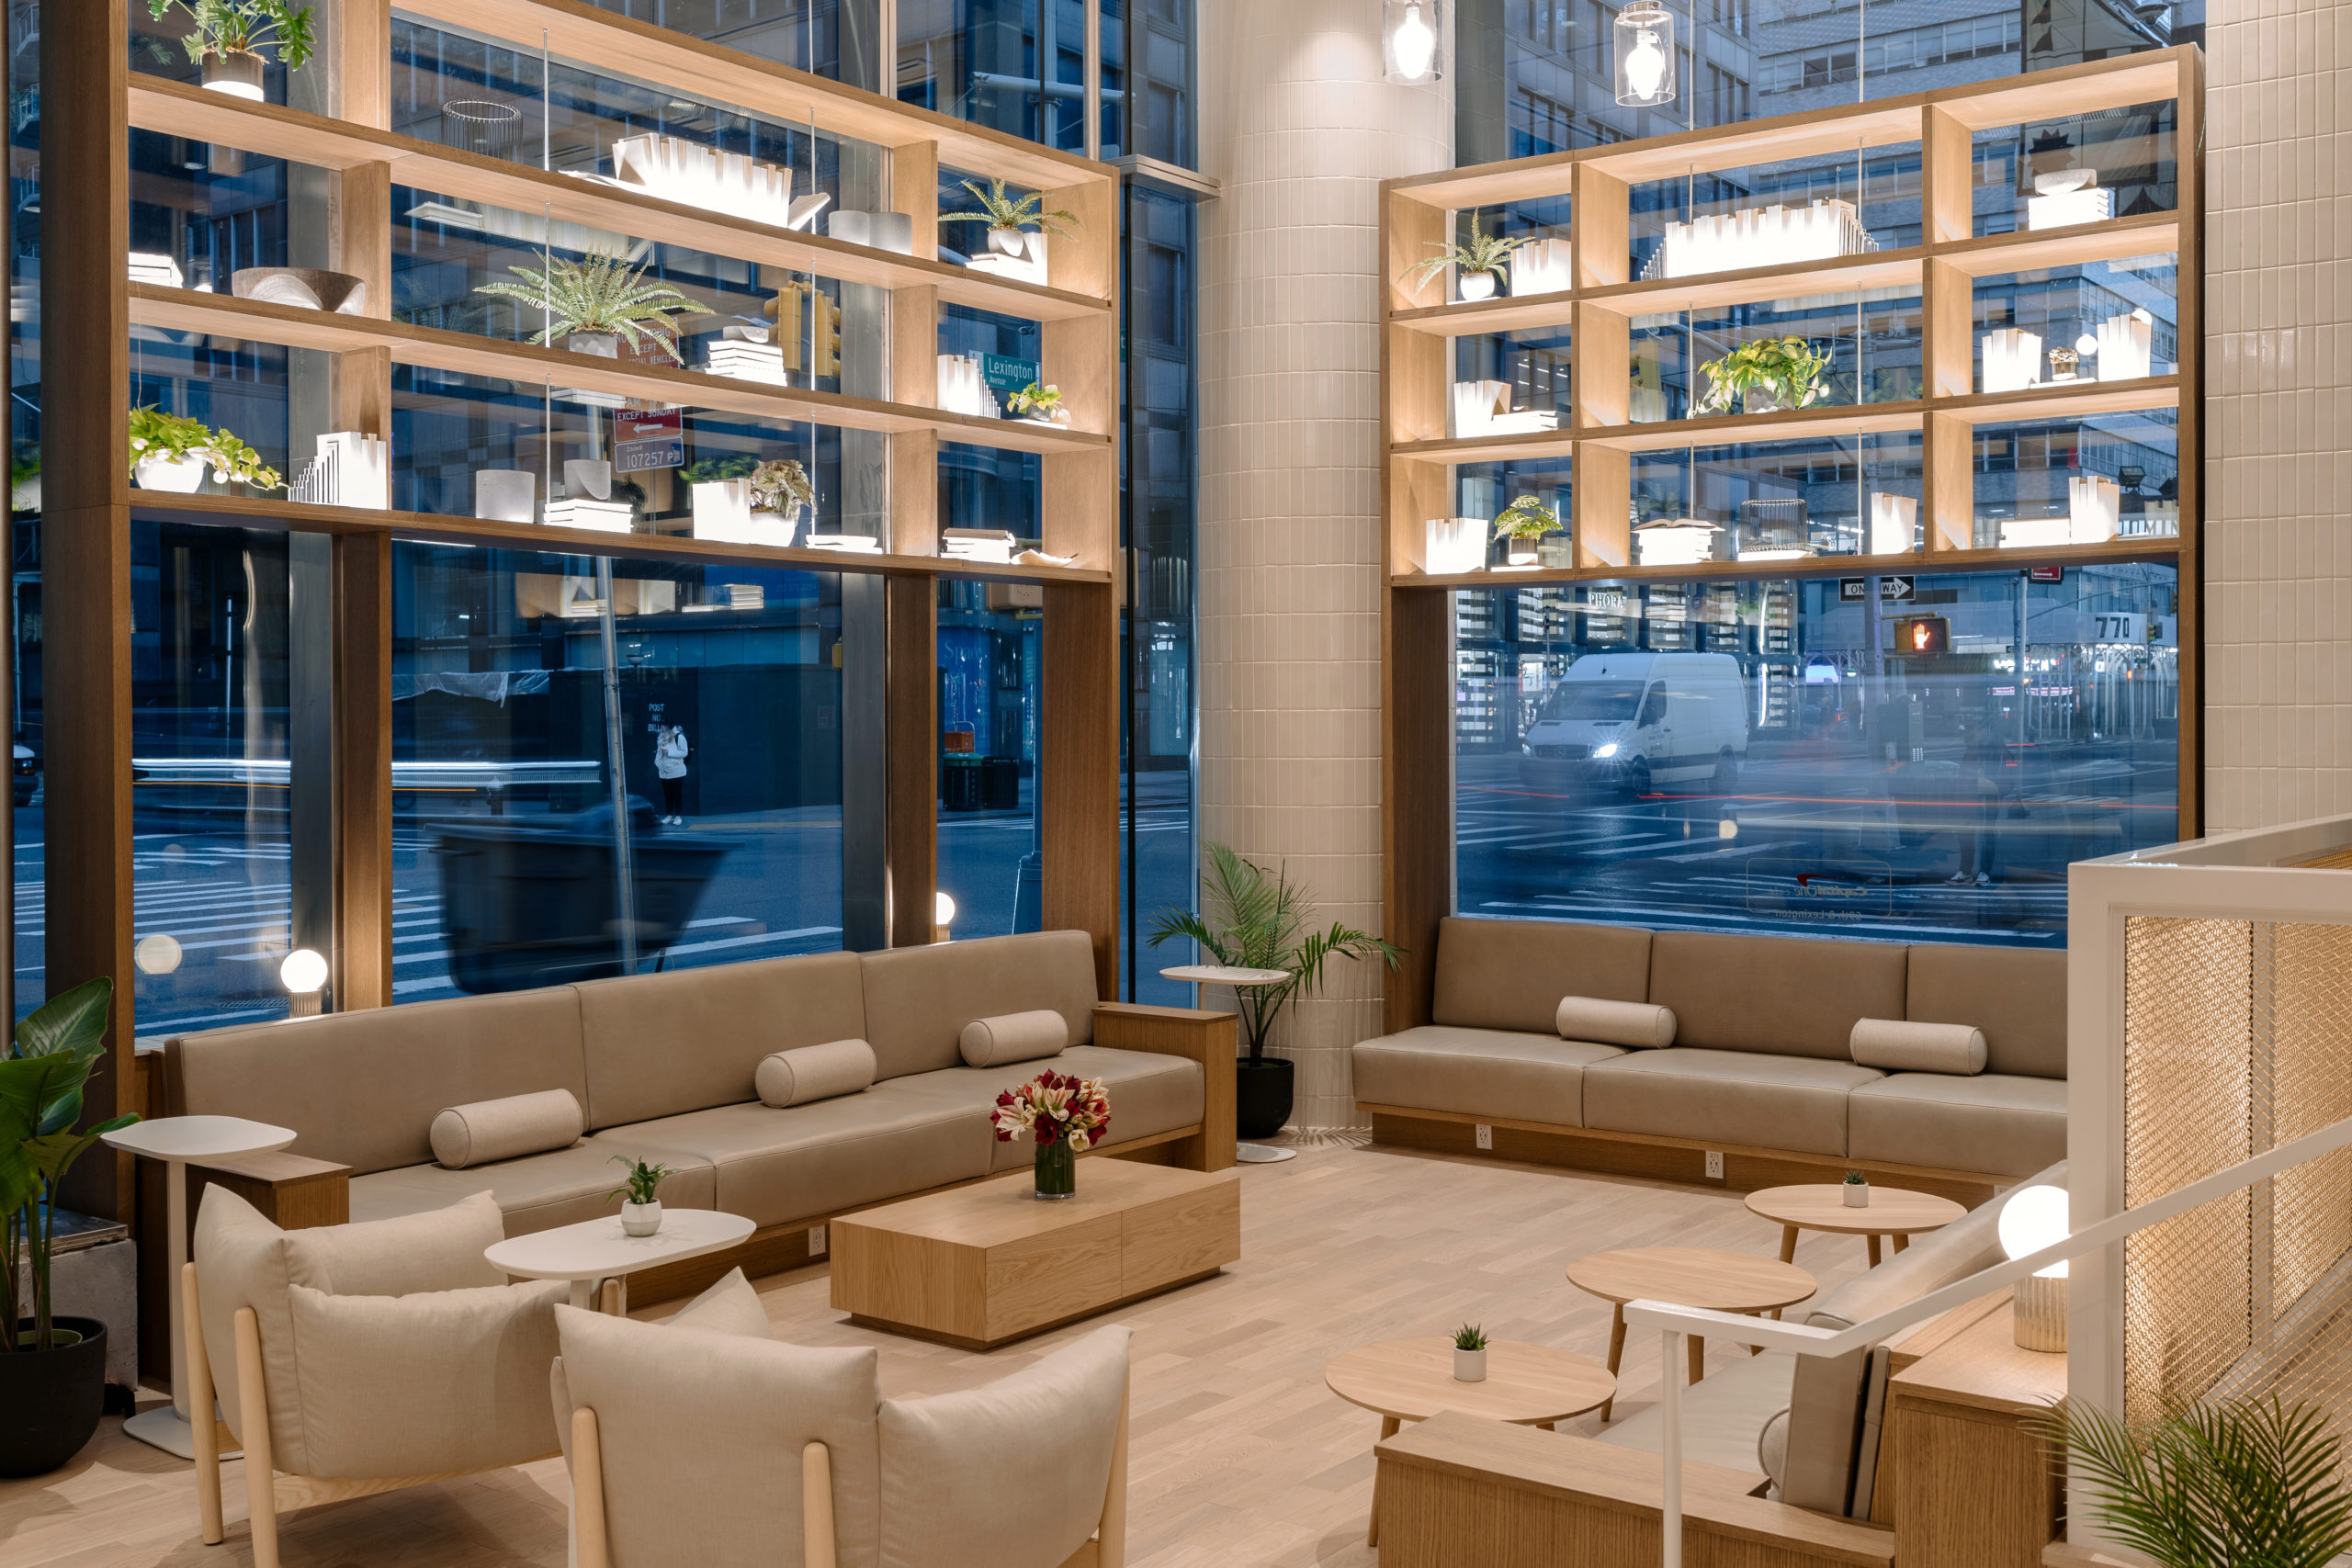 Showing the new café at 59th & Lexington in New York, with open modernistic interiors in cream and wood finishing. As well as ATMs and work spaces for consumers. 